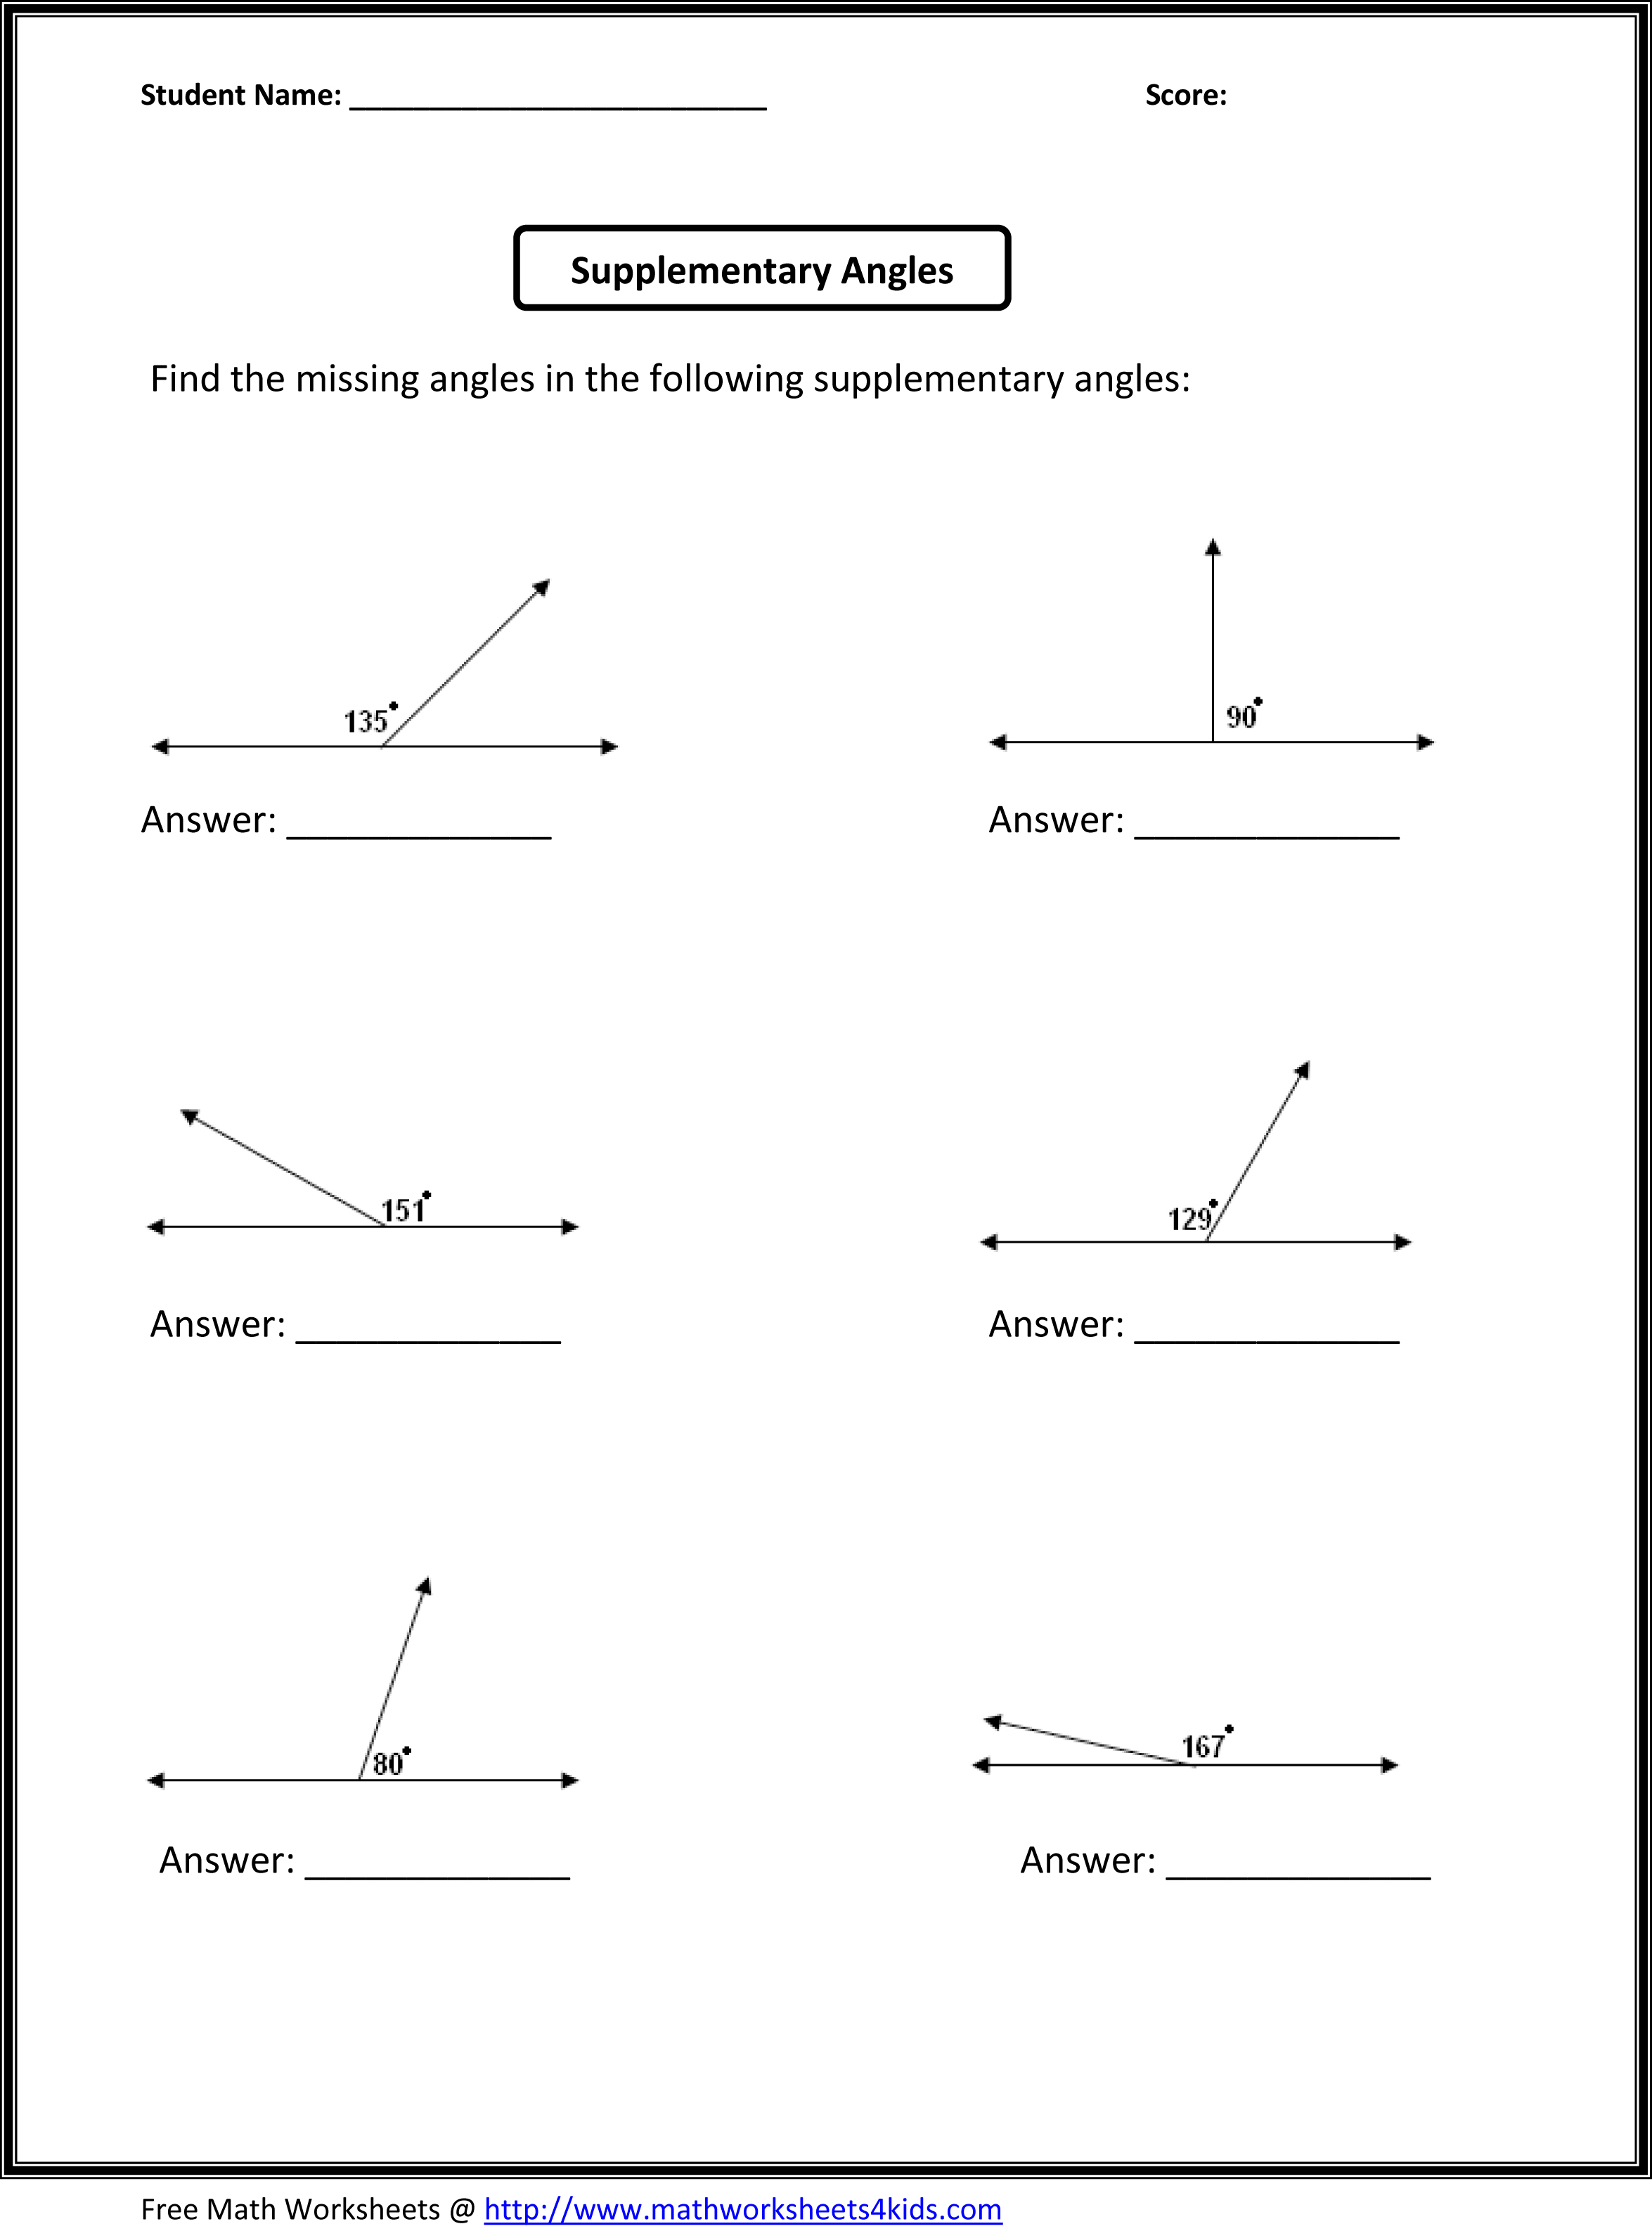 19 Best Images of Scientific Notation Word Problems Worksheet With